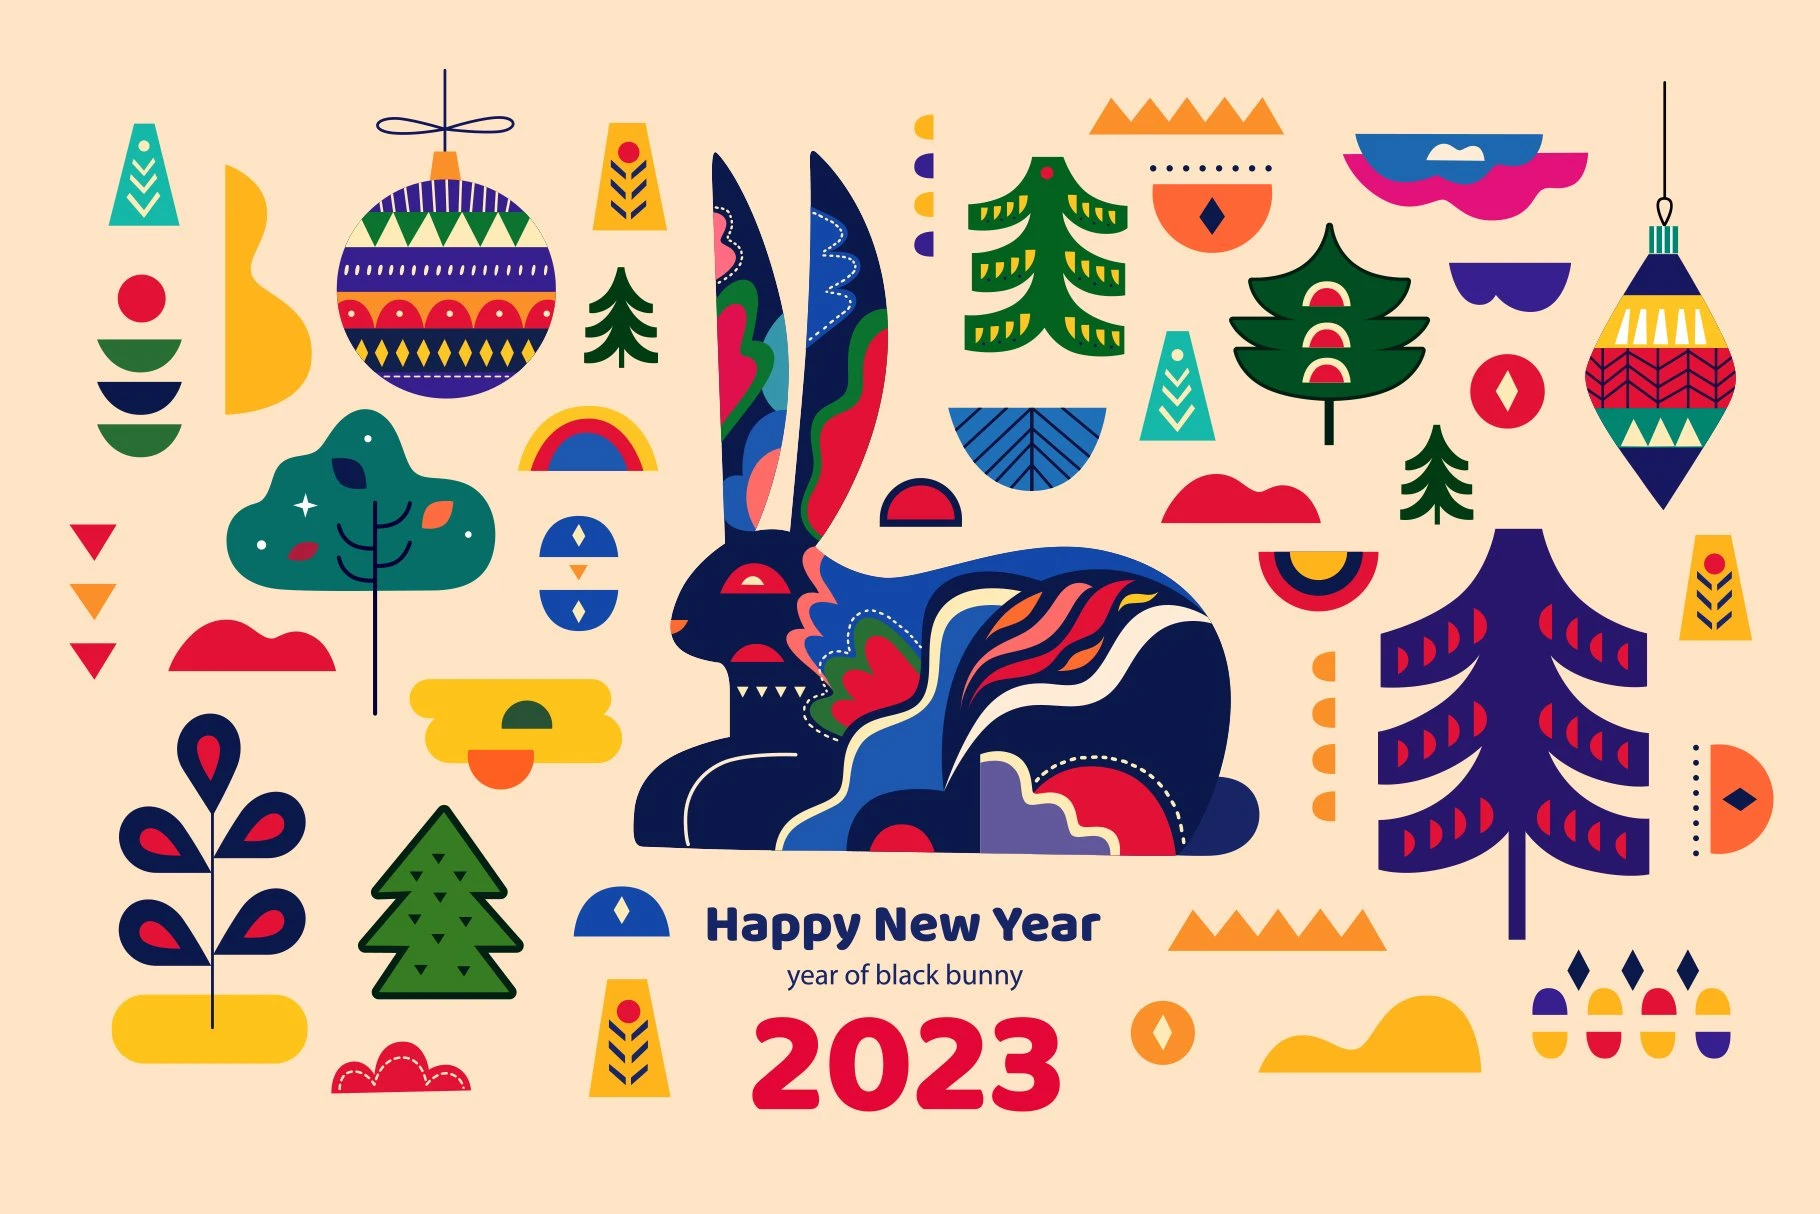 2023 Happy New Year collection